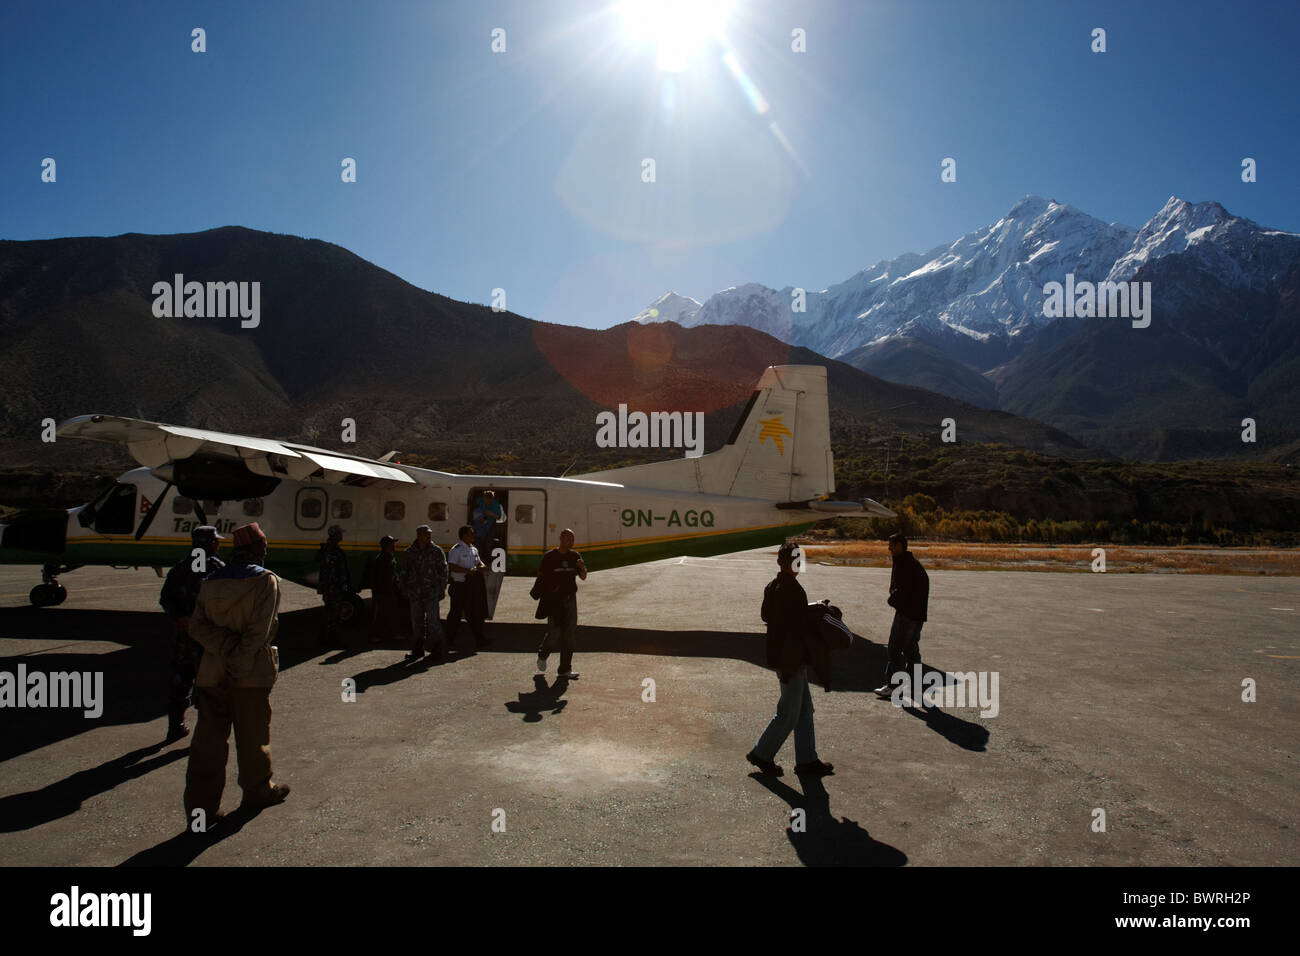 Plane on the tarmac of the airport after landing in Jomosom, Nepal on Saturday October 31, 2009. Stock Photo